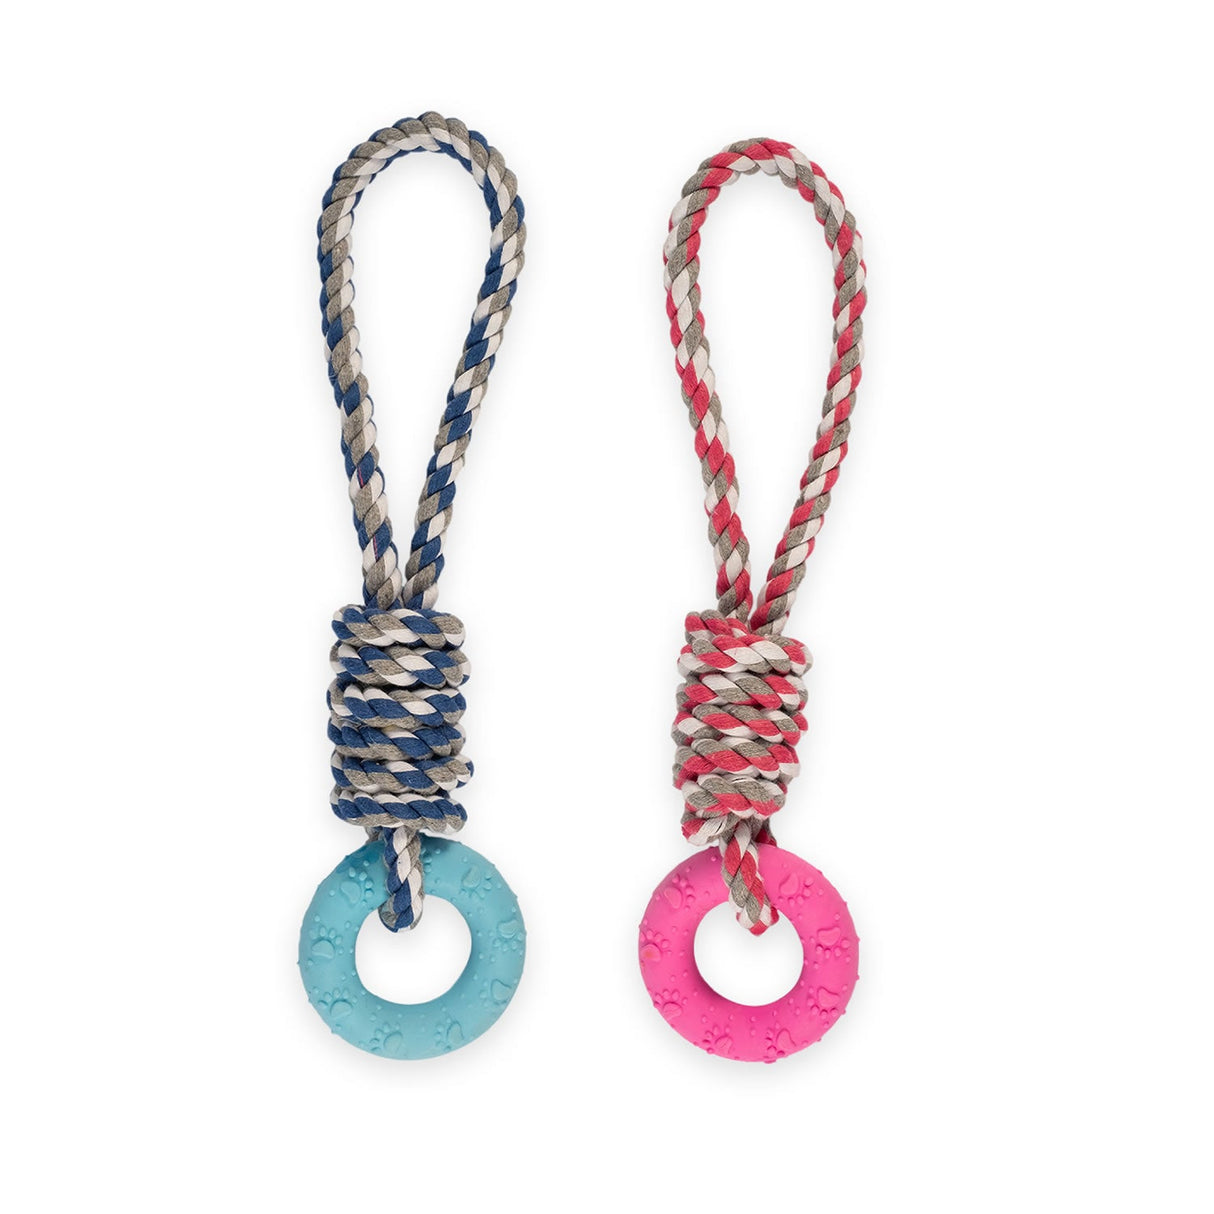 Ancol Small Bite Rope & Ring Blue/Pink BLUE-PINK 